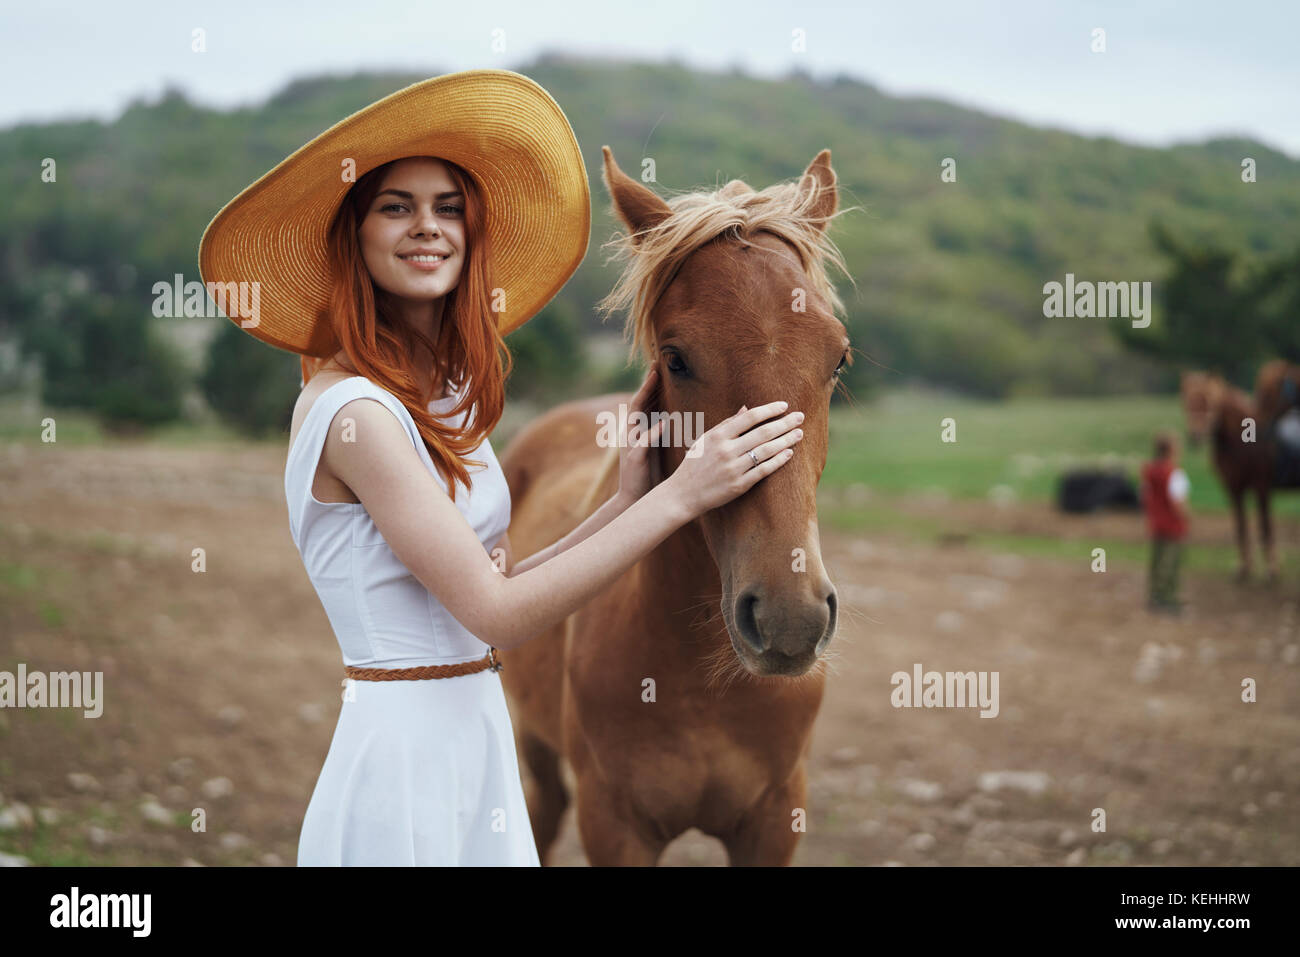 Smiling woman petting horse Stock Photo